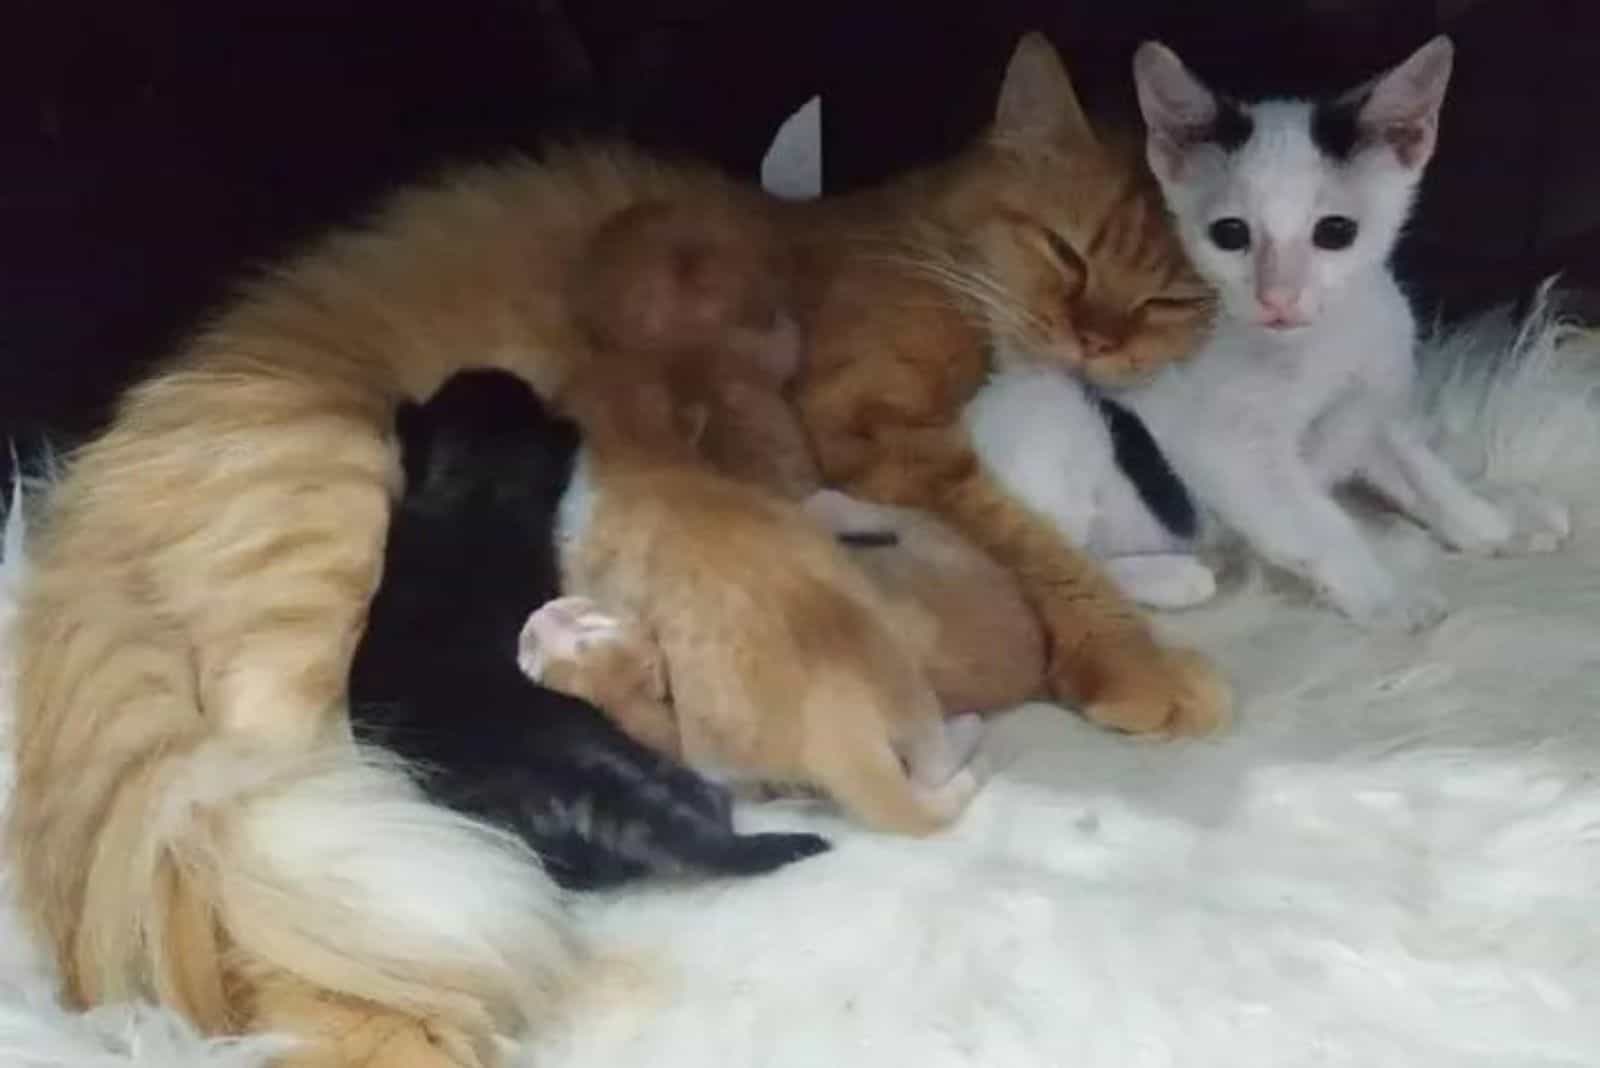 orphaned kittens with other kittens